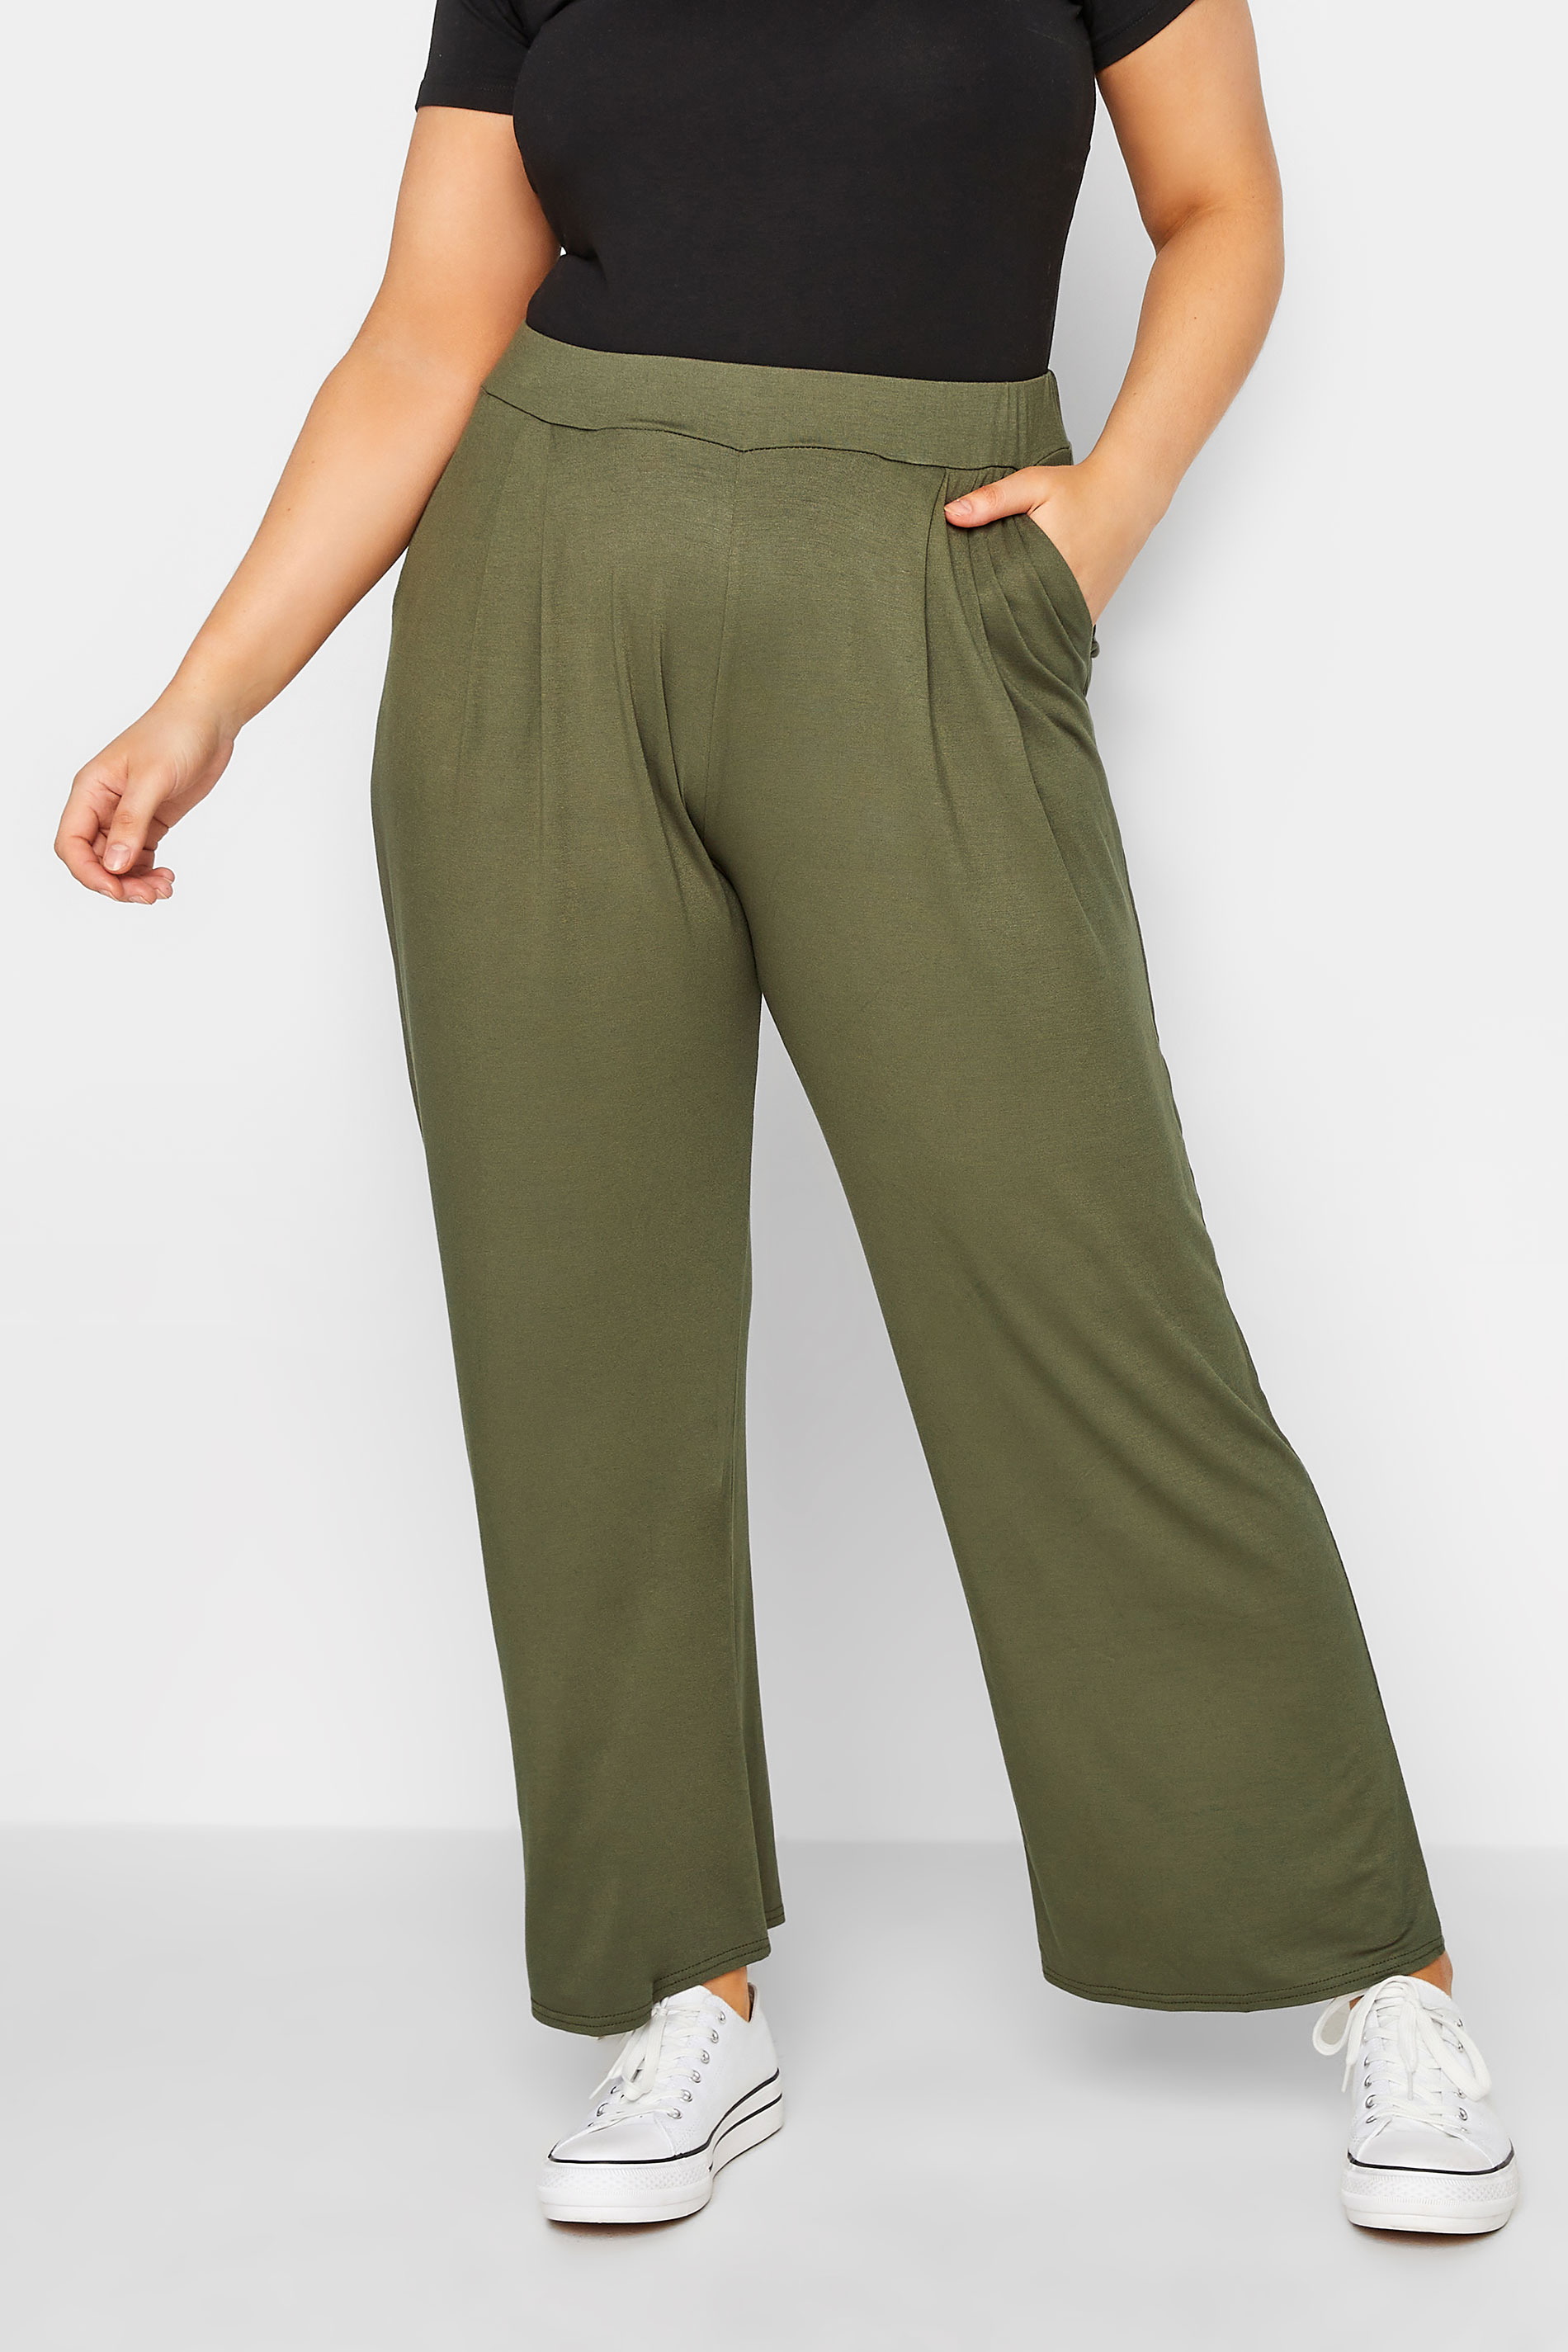 YOURS Plus Size Khaki Green Pleat Front Wide Leg Trousers | Yours Clothing 1